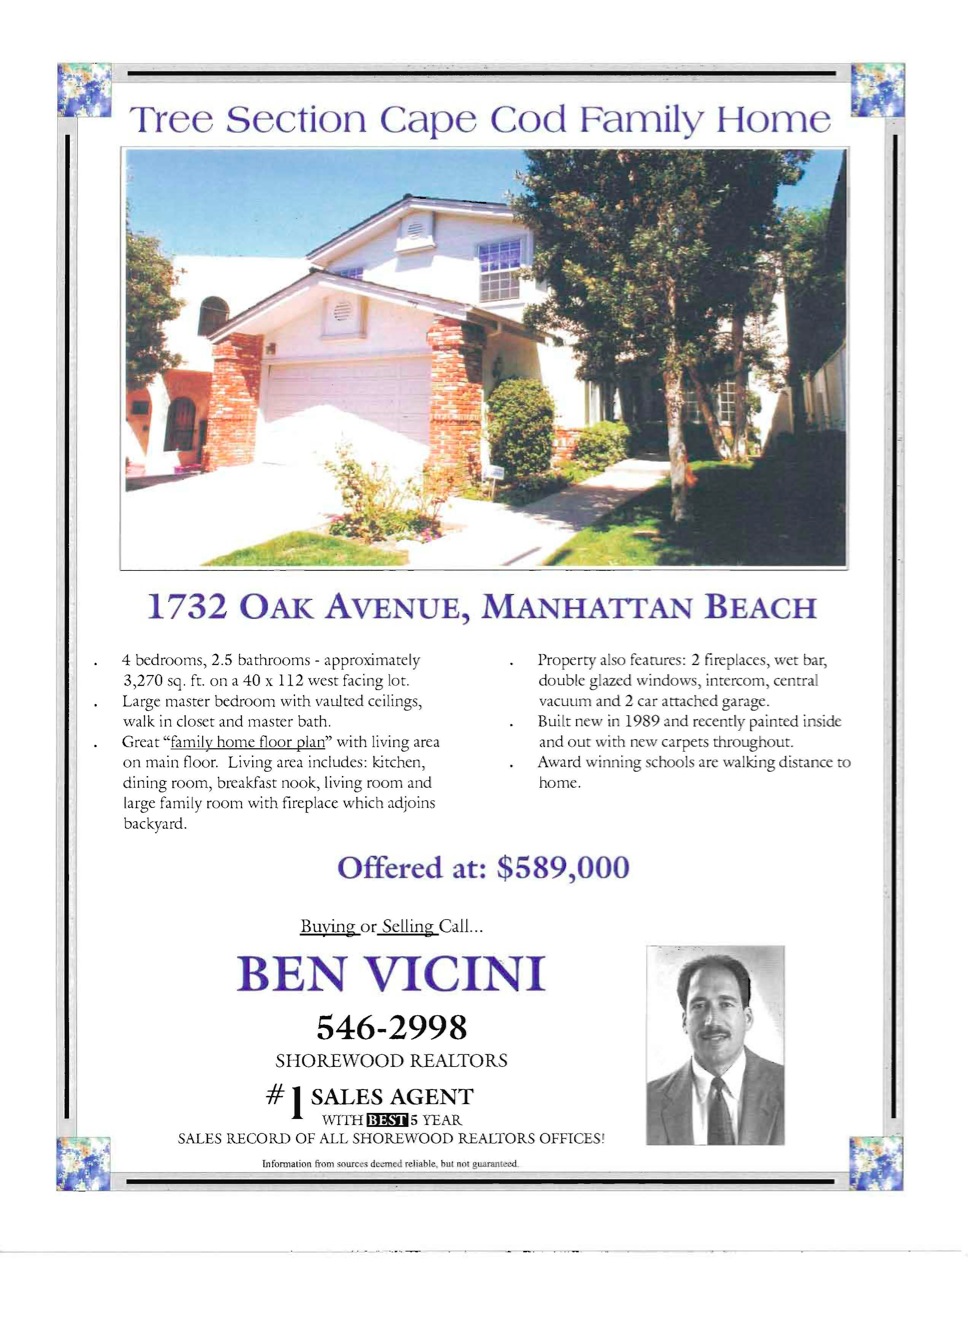 Vicini's Past Listings & Sales_Page_56